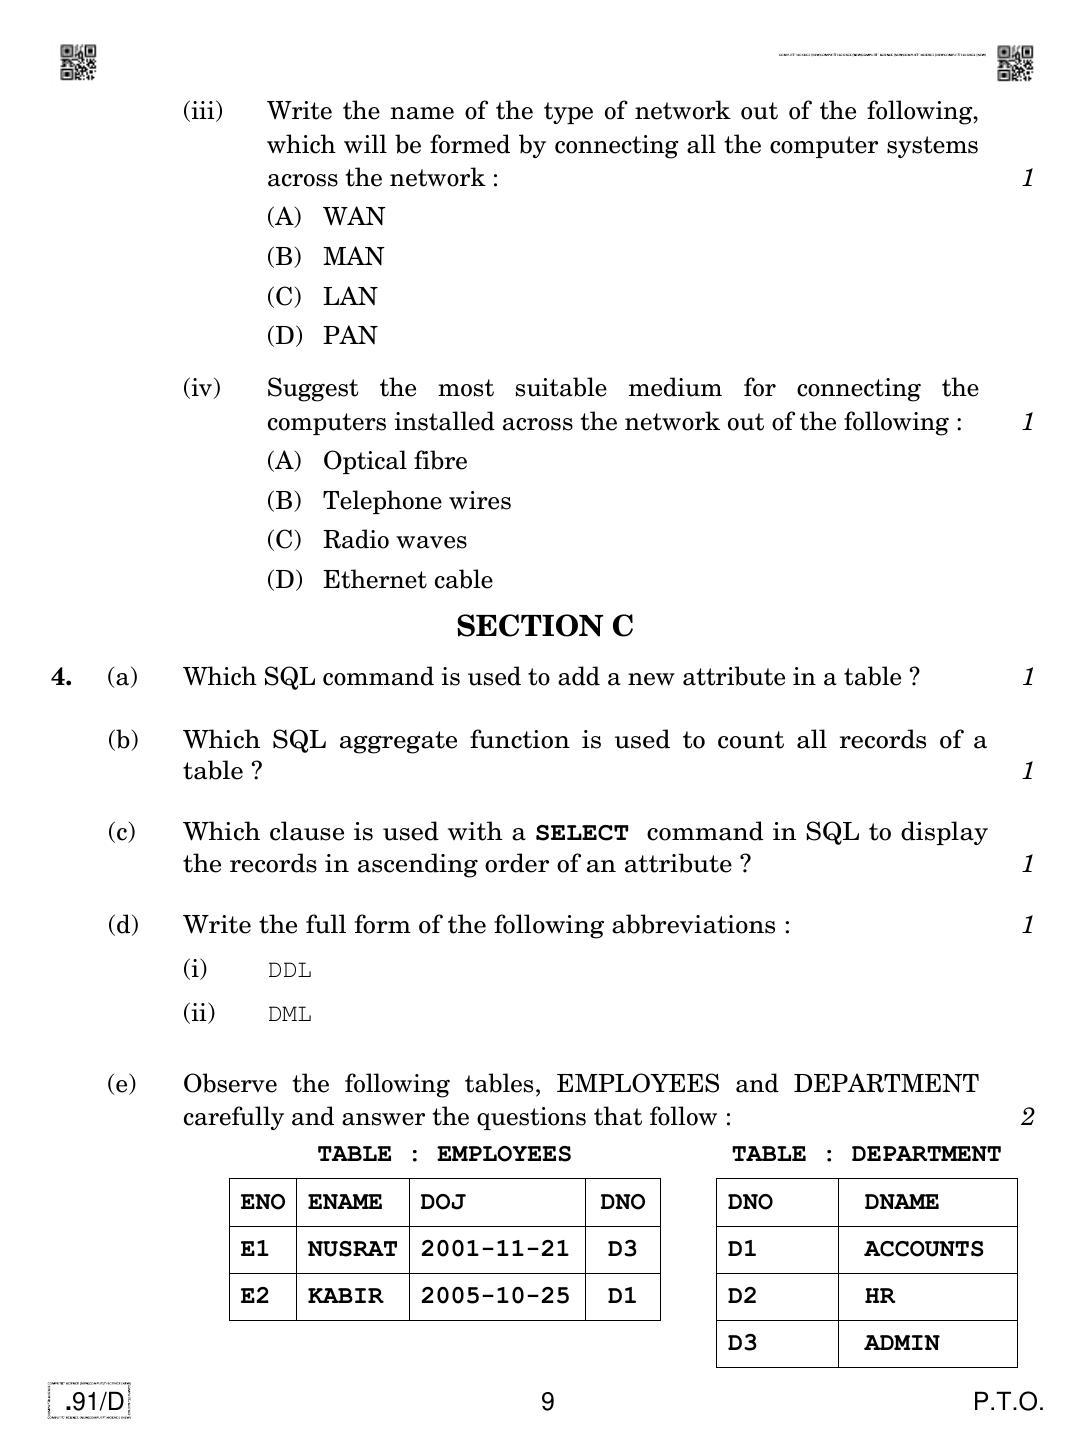 CBSE Class 12 CS 2020 Compartment Question Paper - Page 9